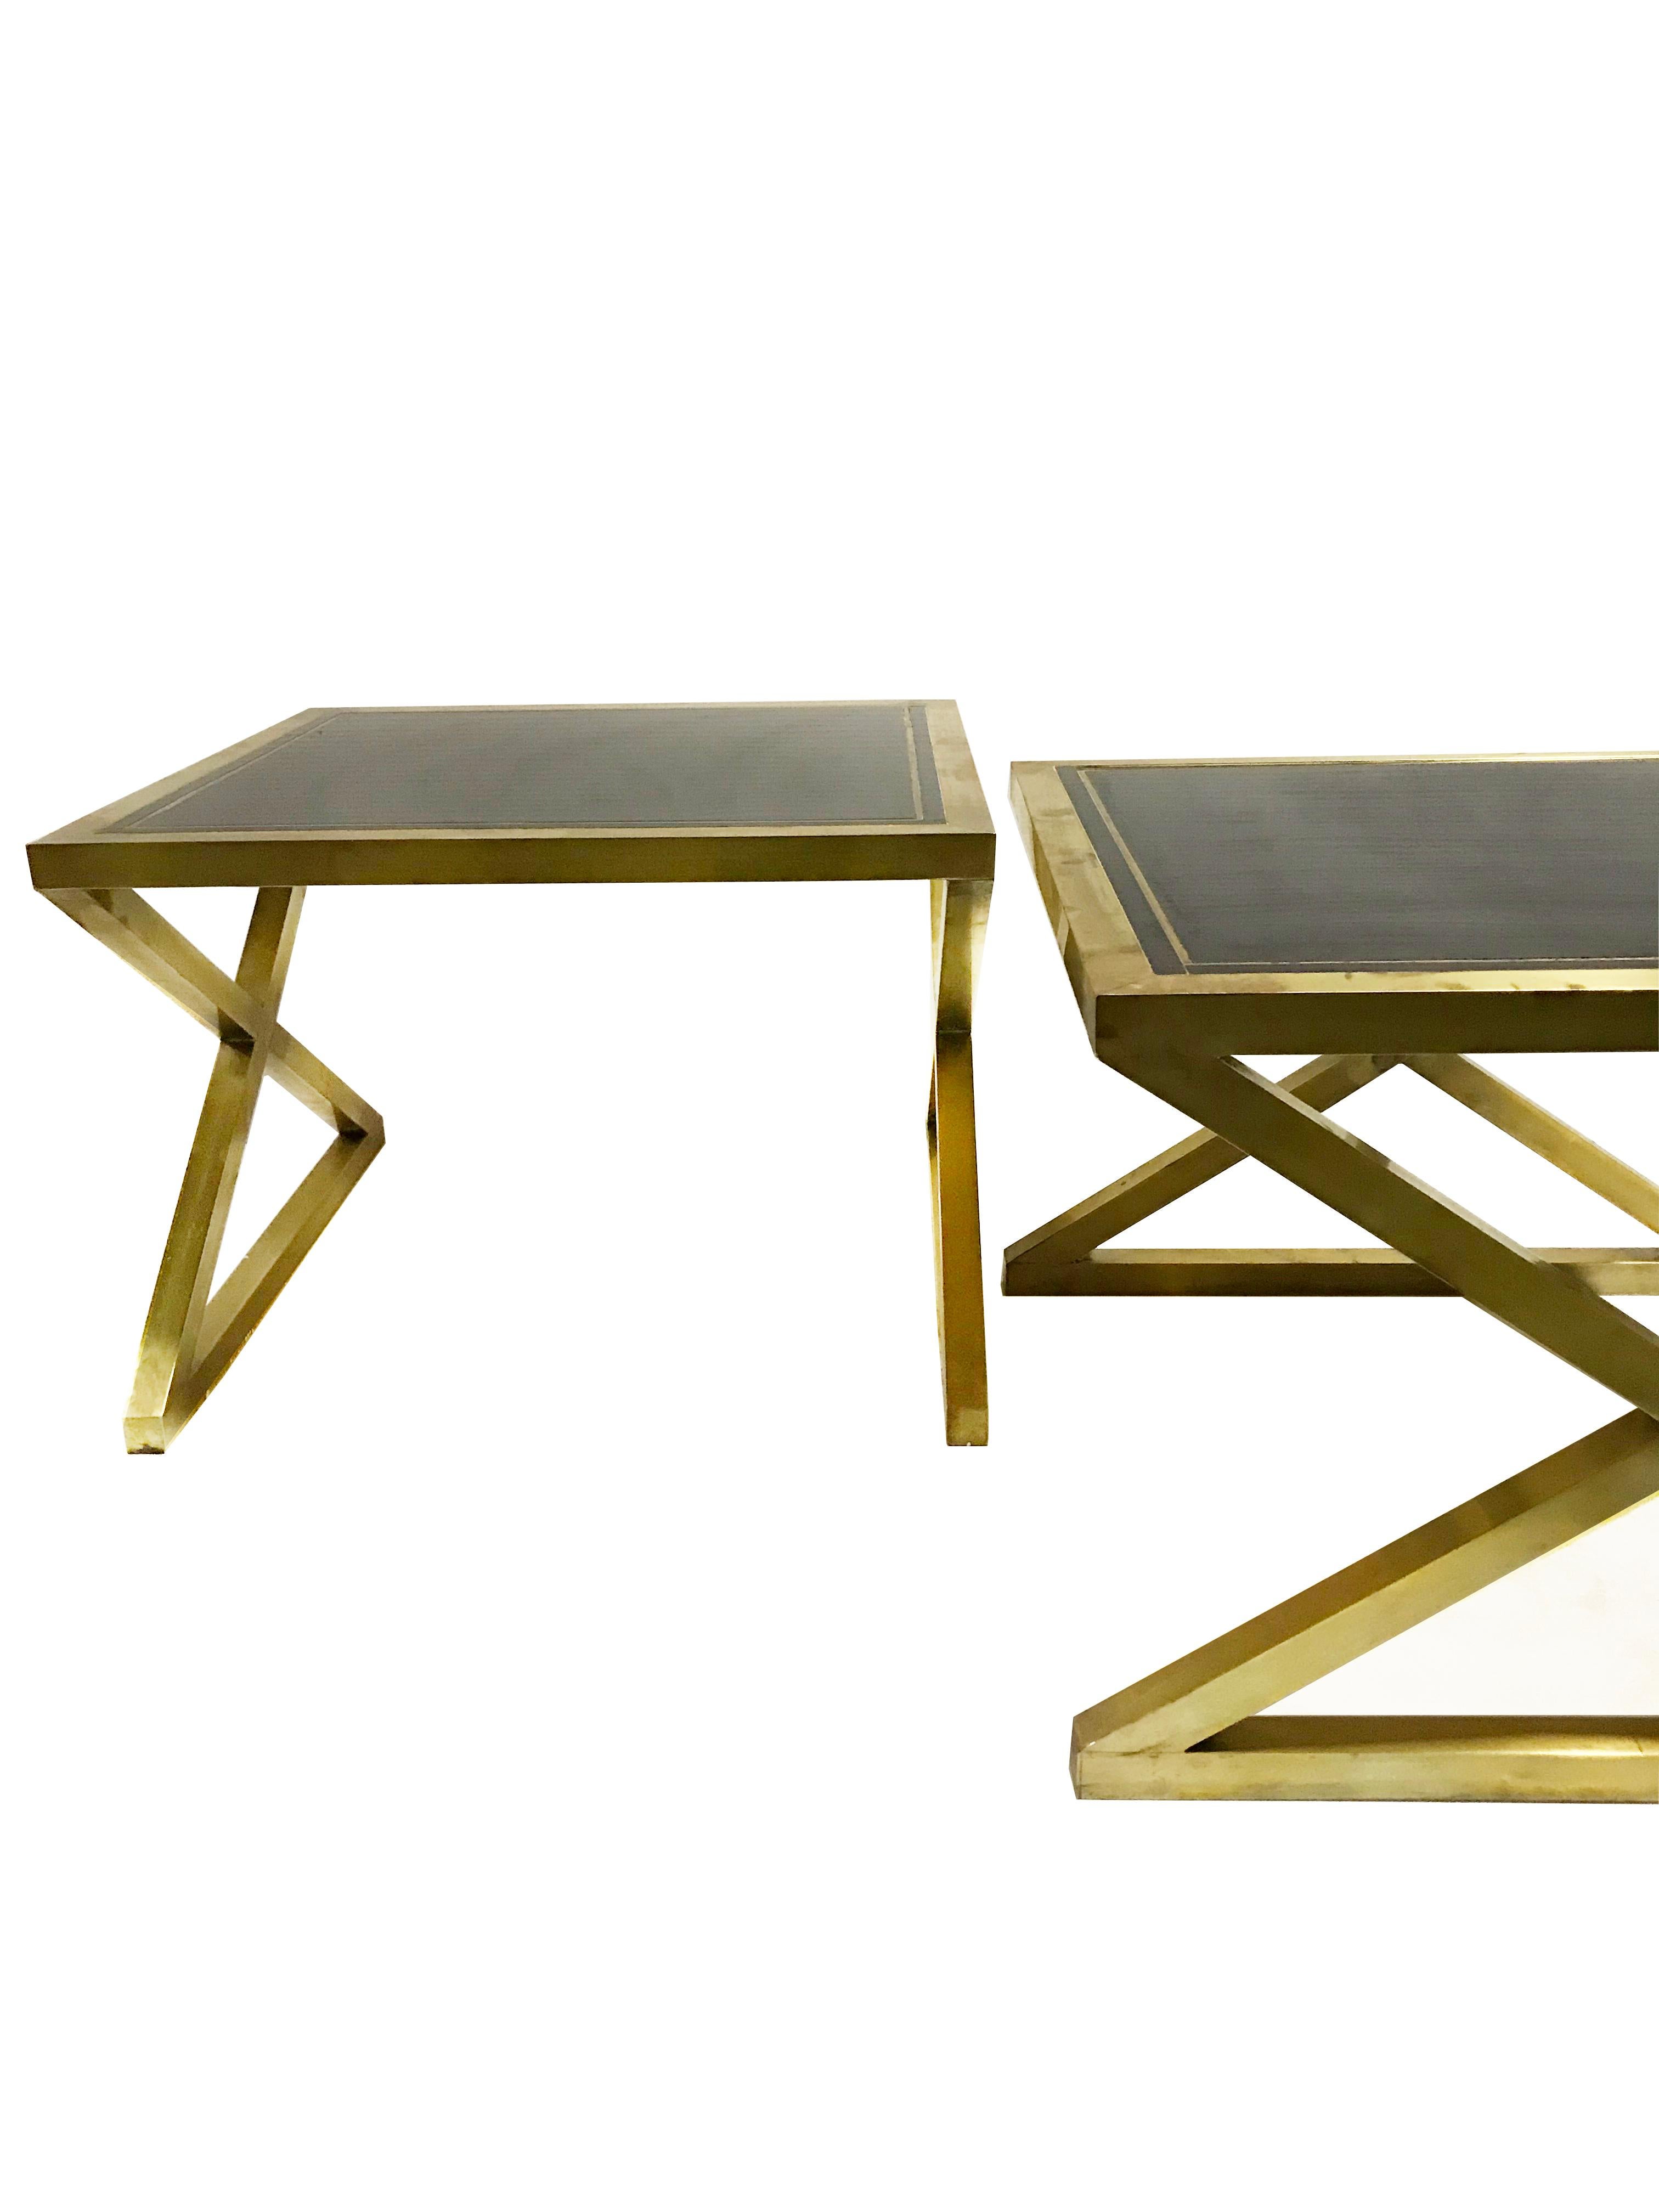 Late 20th Century Italian X-Frame Side Tables, Pair, Bronze with Black Murano Glass Mirror Top For Sale